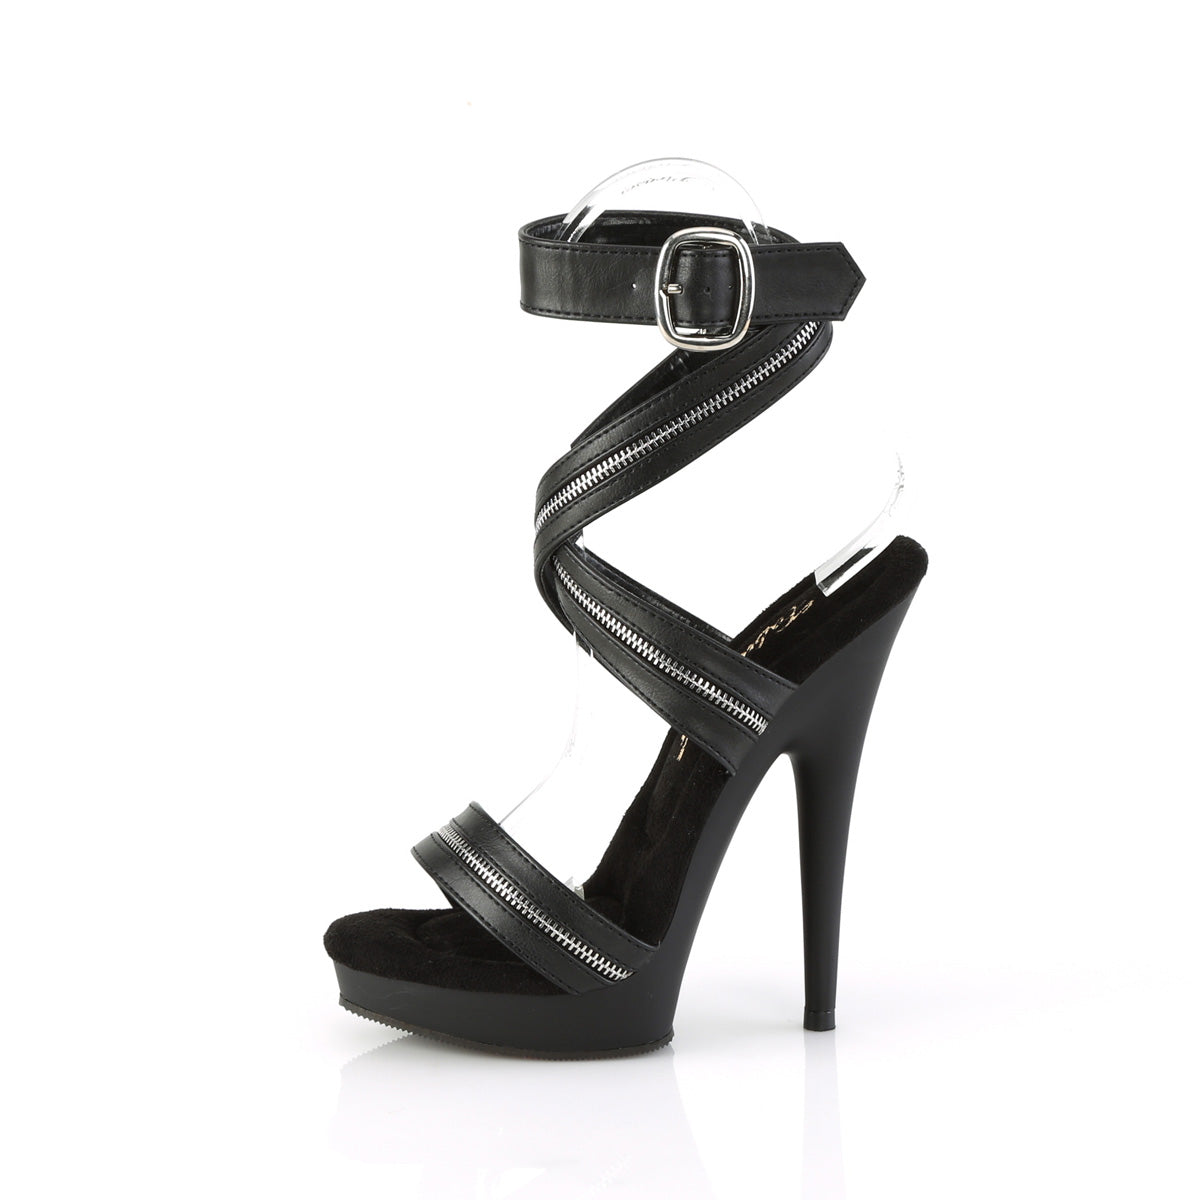 Sexy Strappy Heels - Sultry-619